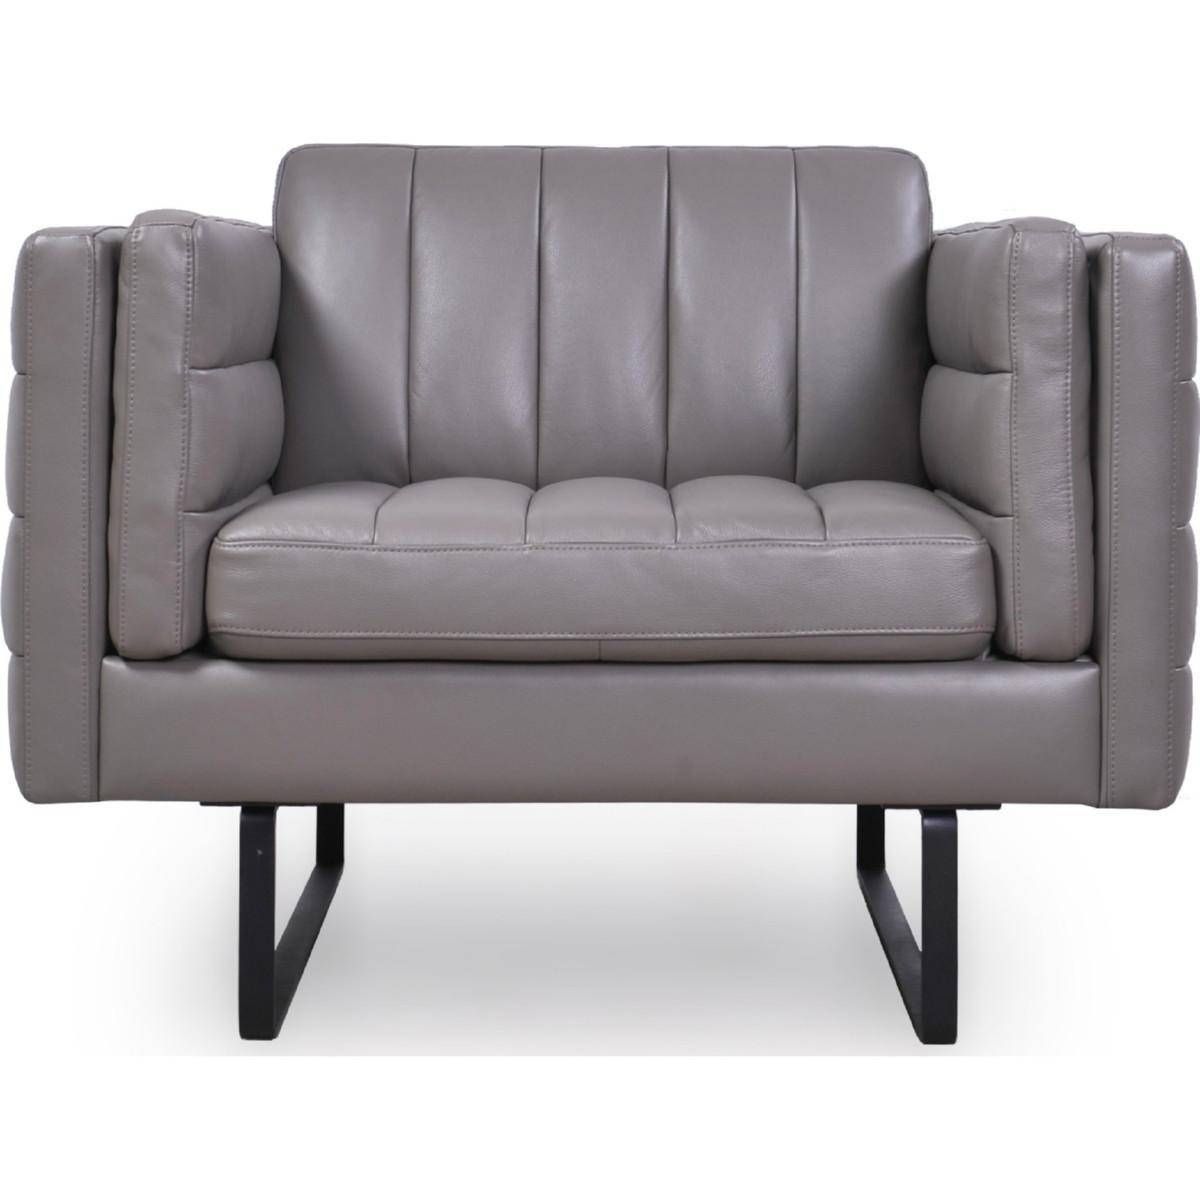 Buy Moroni Orson 582 Arm Chairs In Gray, Top Grain Leather Throughout Orsen Tv Stands (View 10 of 15)